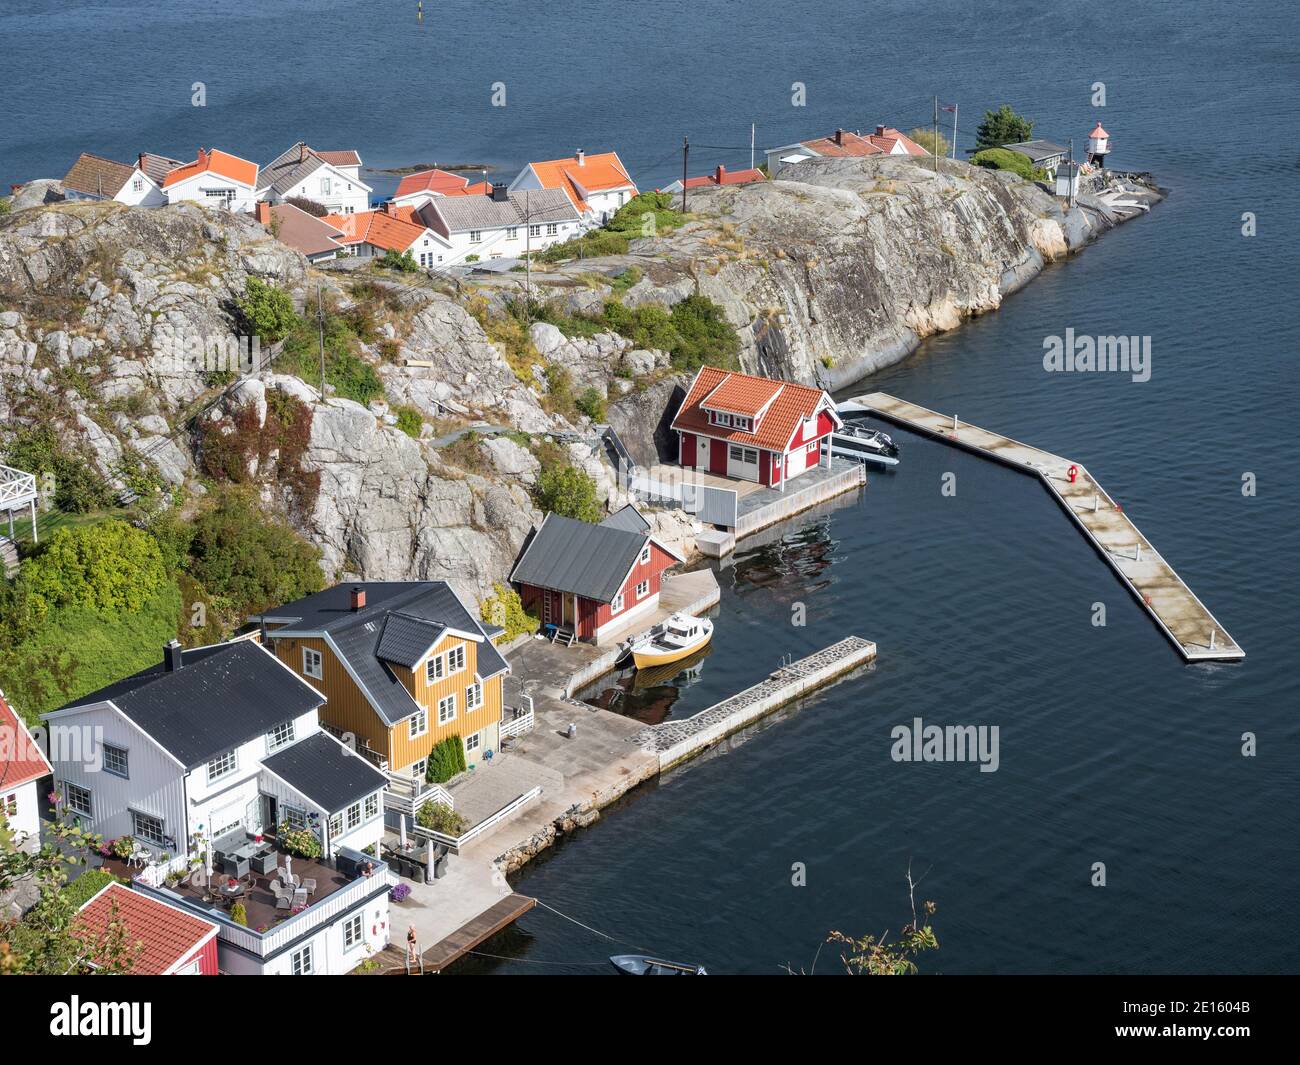 Typical white wooden houses at the waterfront, island Kragero, southern norwegian coast, Norway Stock Photo